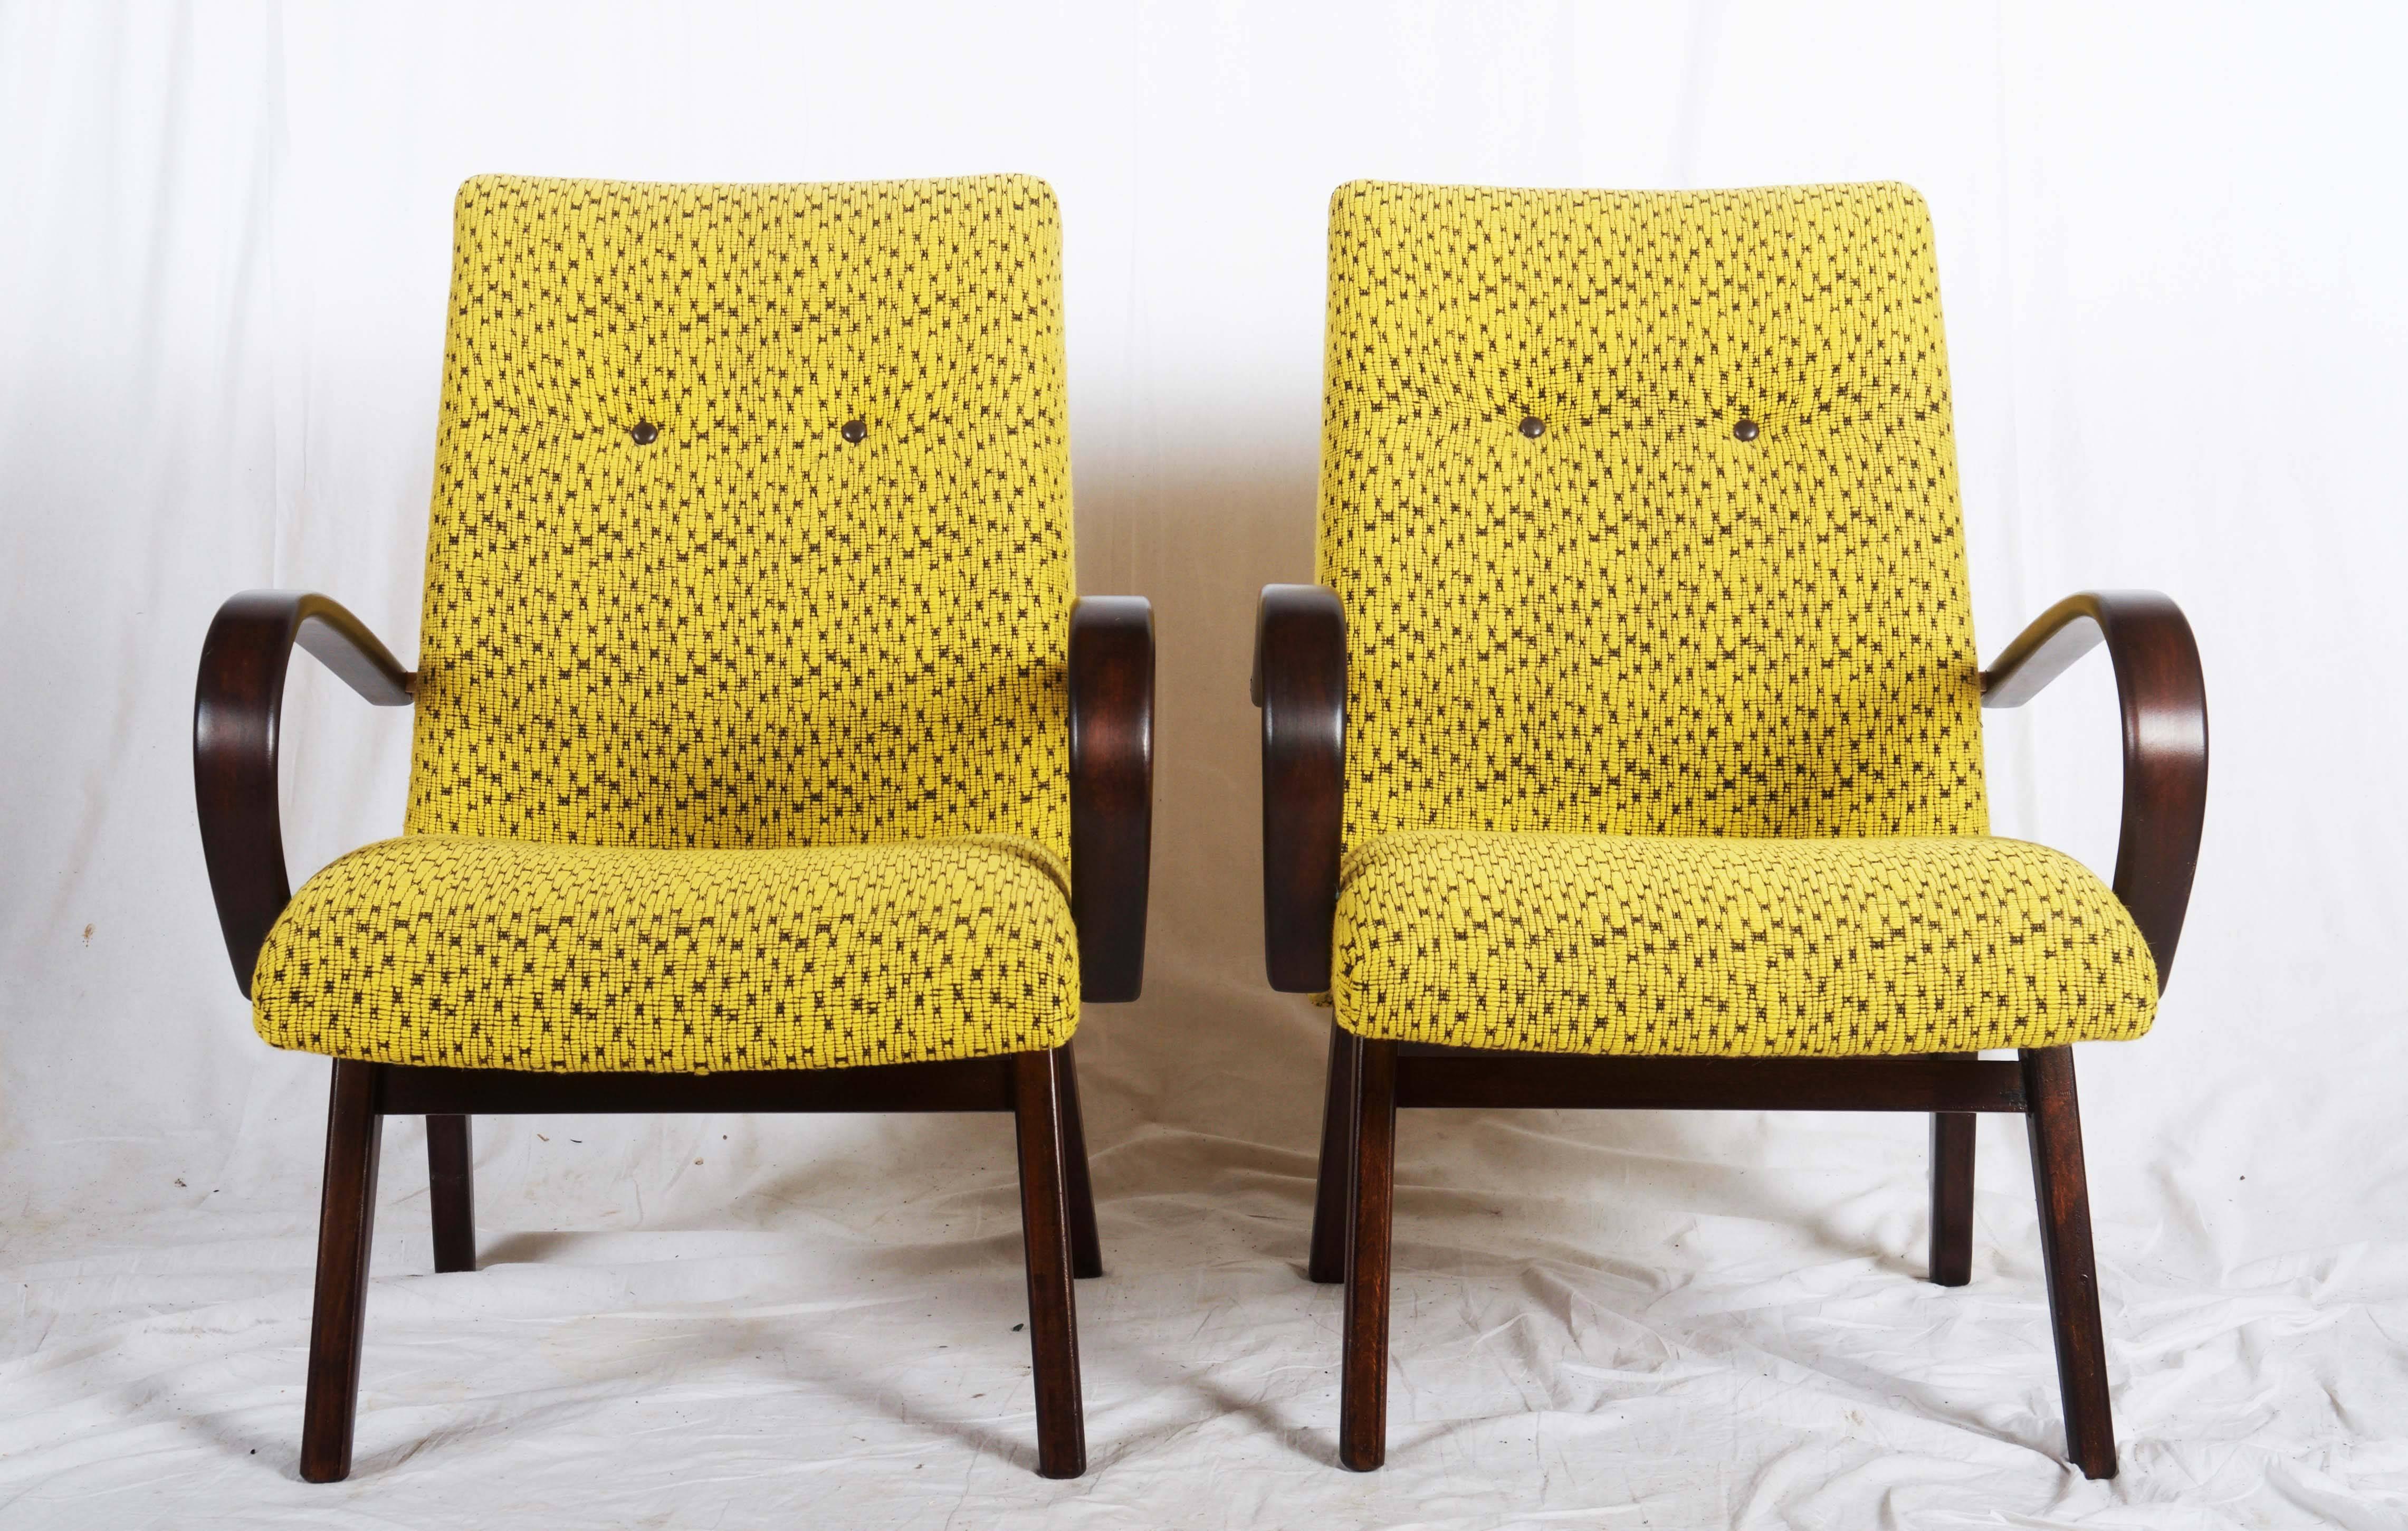 Pair of armchairs from the mid-1960s. Beechwood/ bentwood construction with upholstery.
Nearly perfect original condition.